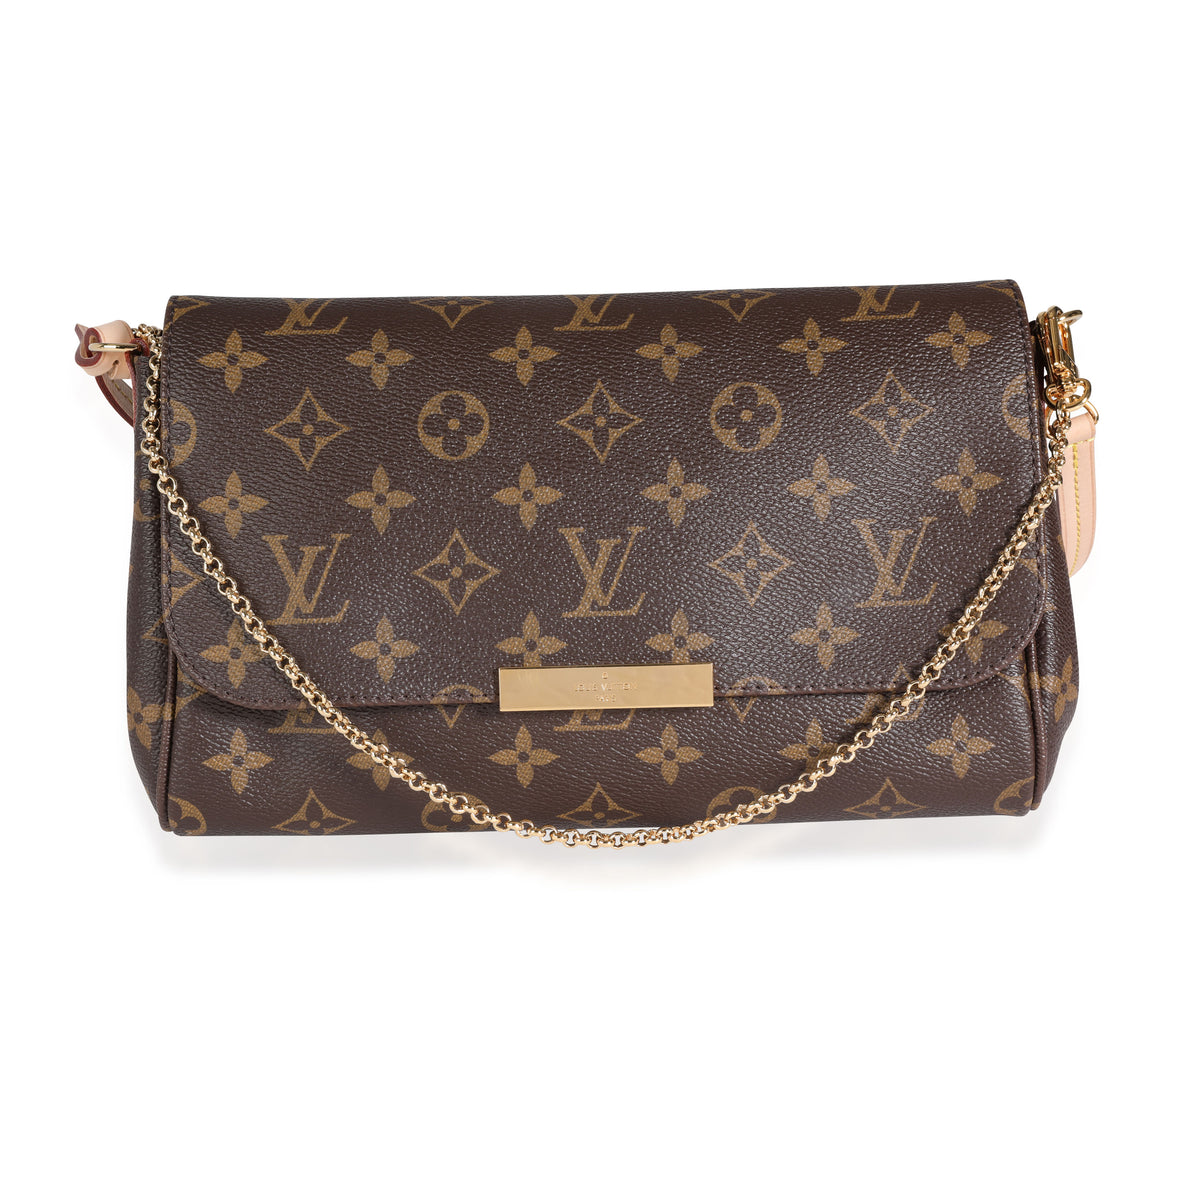 Top 6 Most Affordable Louis Vuitton Bags, myGemma